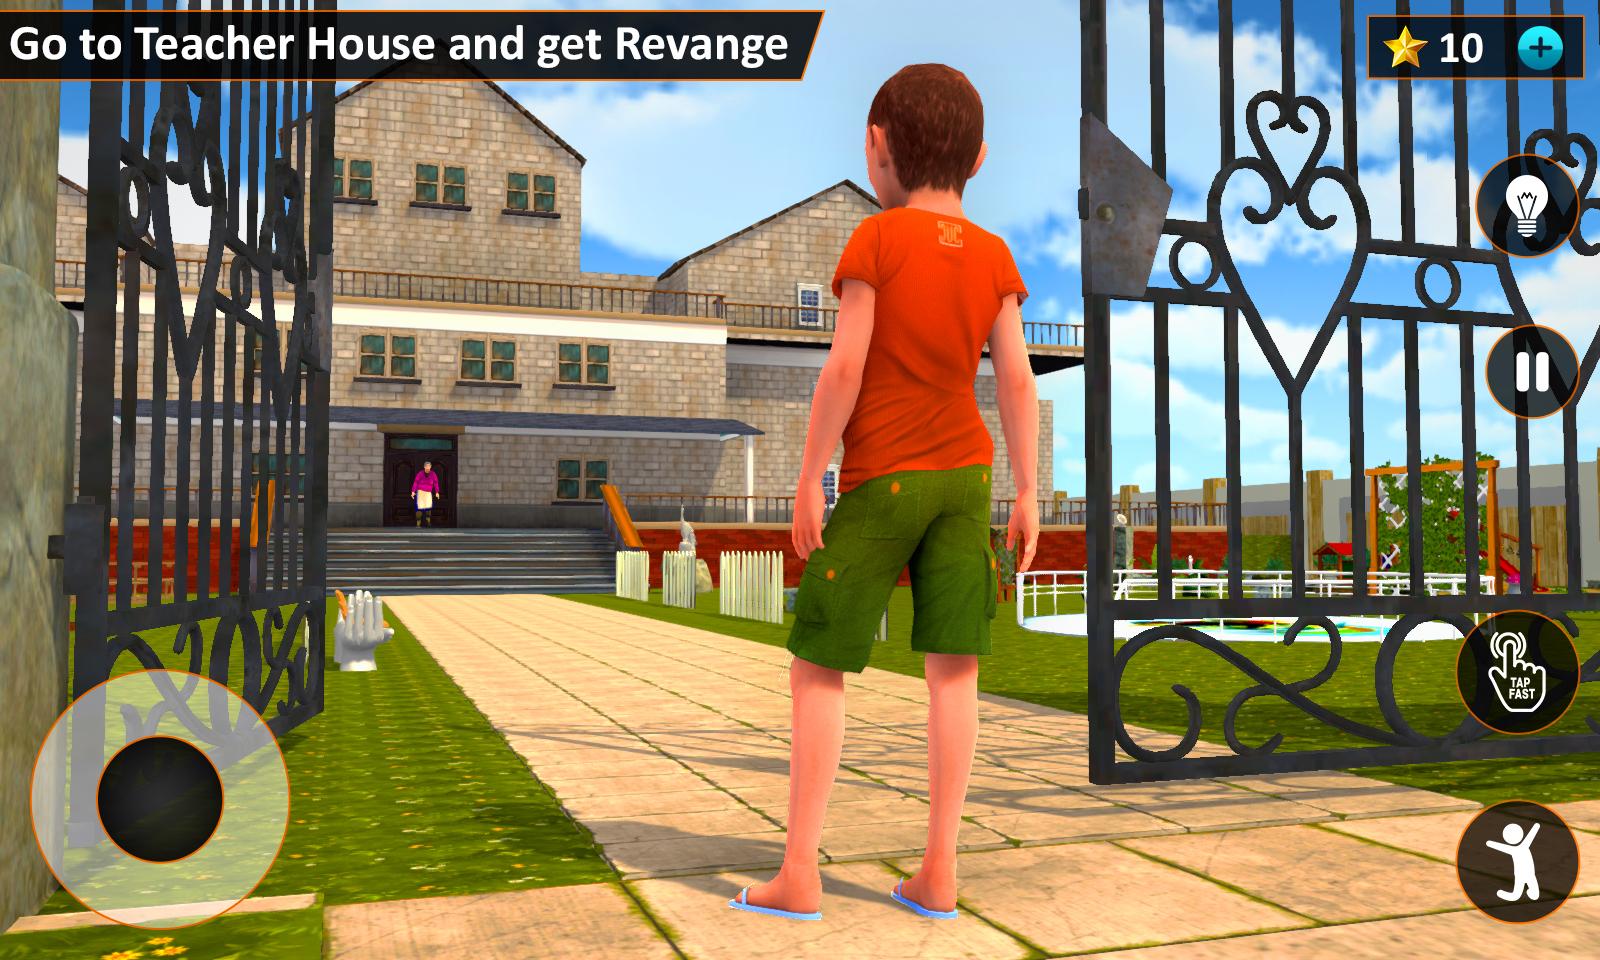 Download and play Scare Scary Bad Teacher 3D on PC with MuMu Player